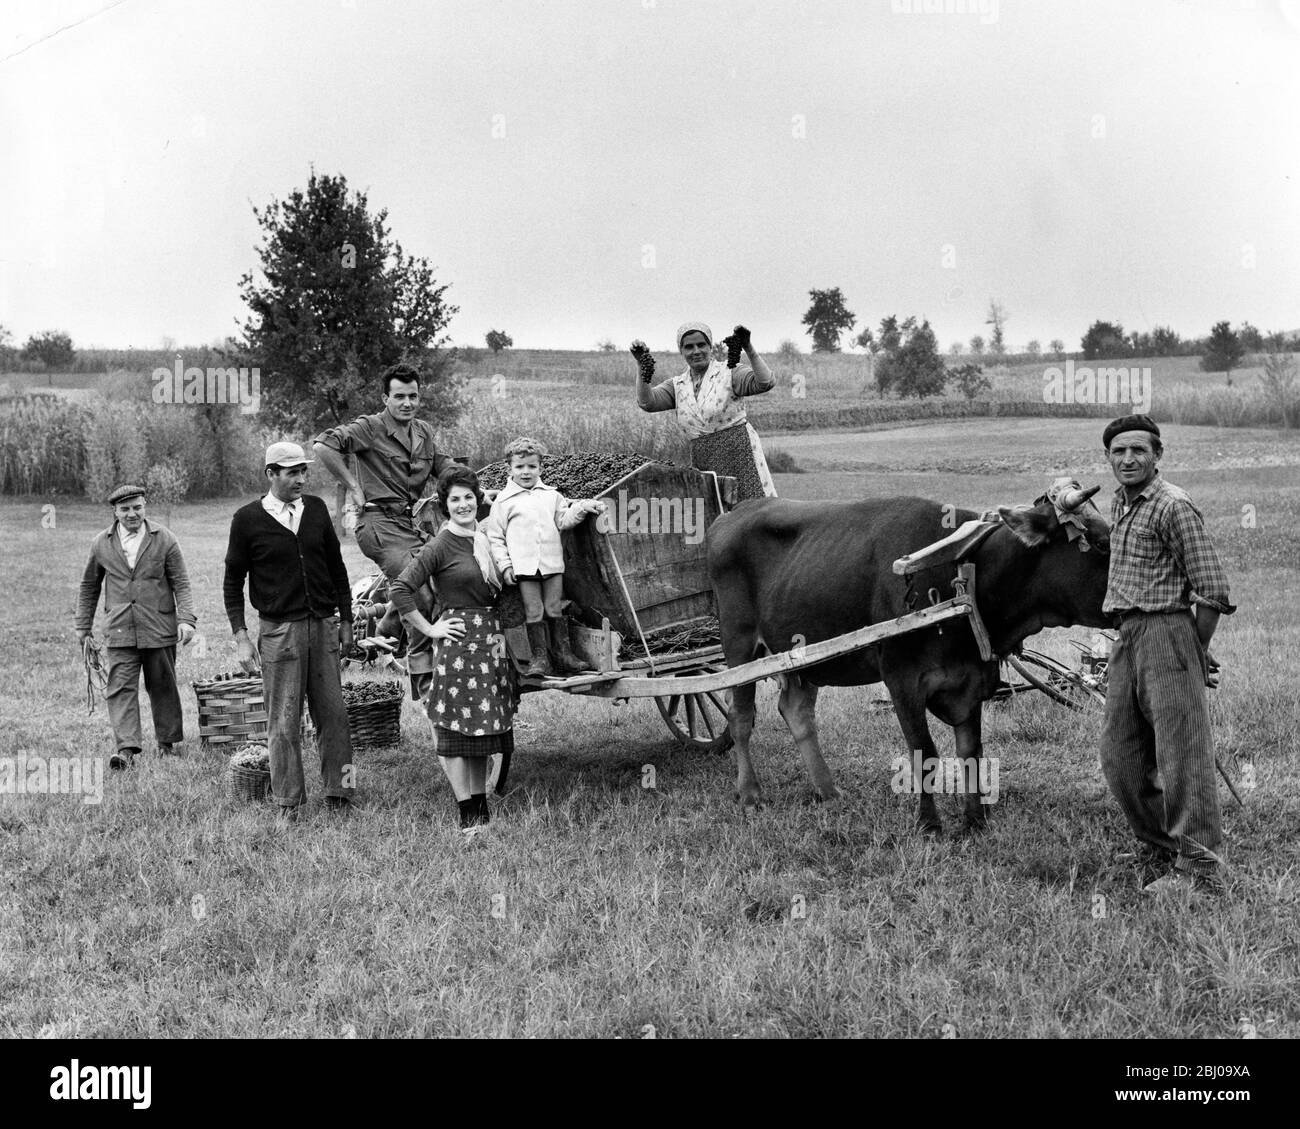 Signor Boeronig and his family have almost completed the grape harvest which is carried by a loaded ox cart from the vineyard to his farmhouse in Auroro Corso situated in the Torino area of Italy - 19 October 1962 Stock Photo